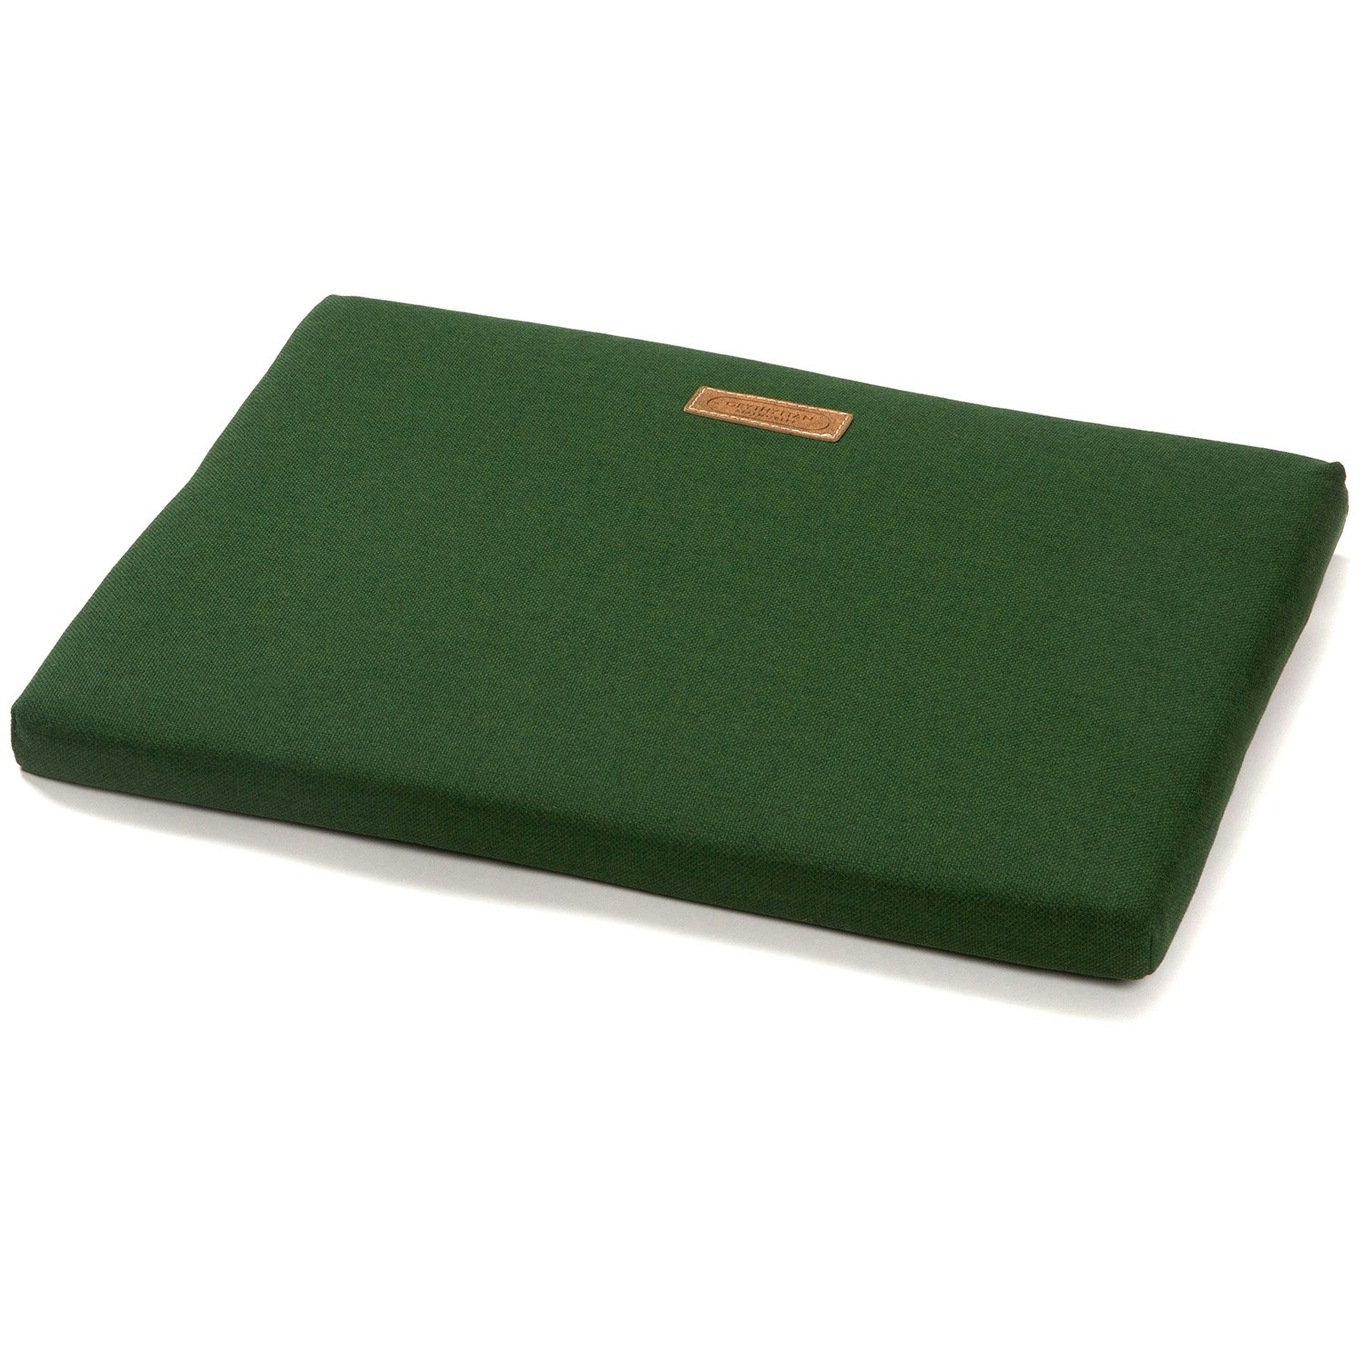 A3 Seat Cushion For Footstool, Green